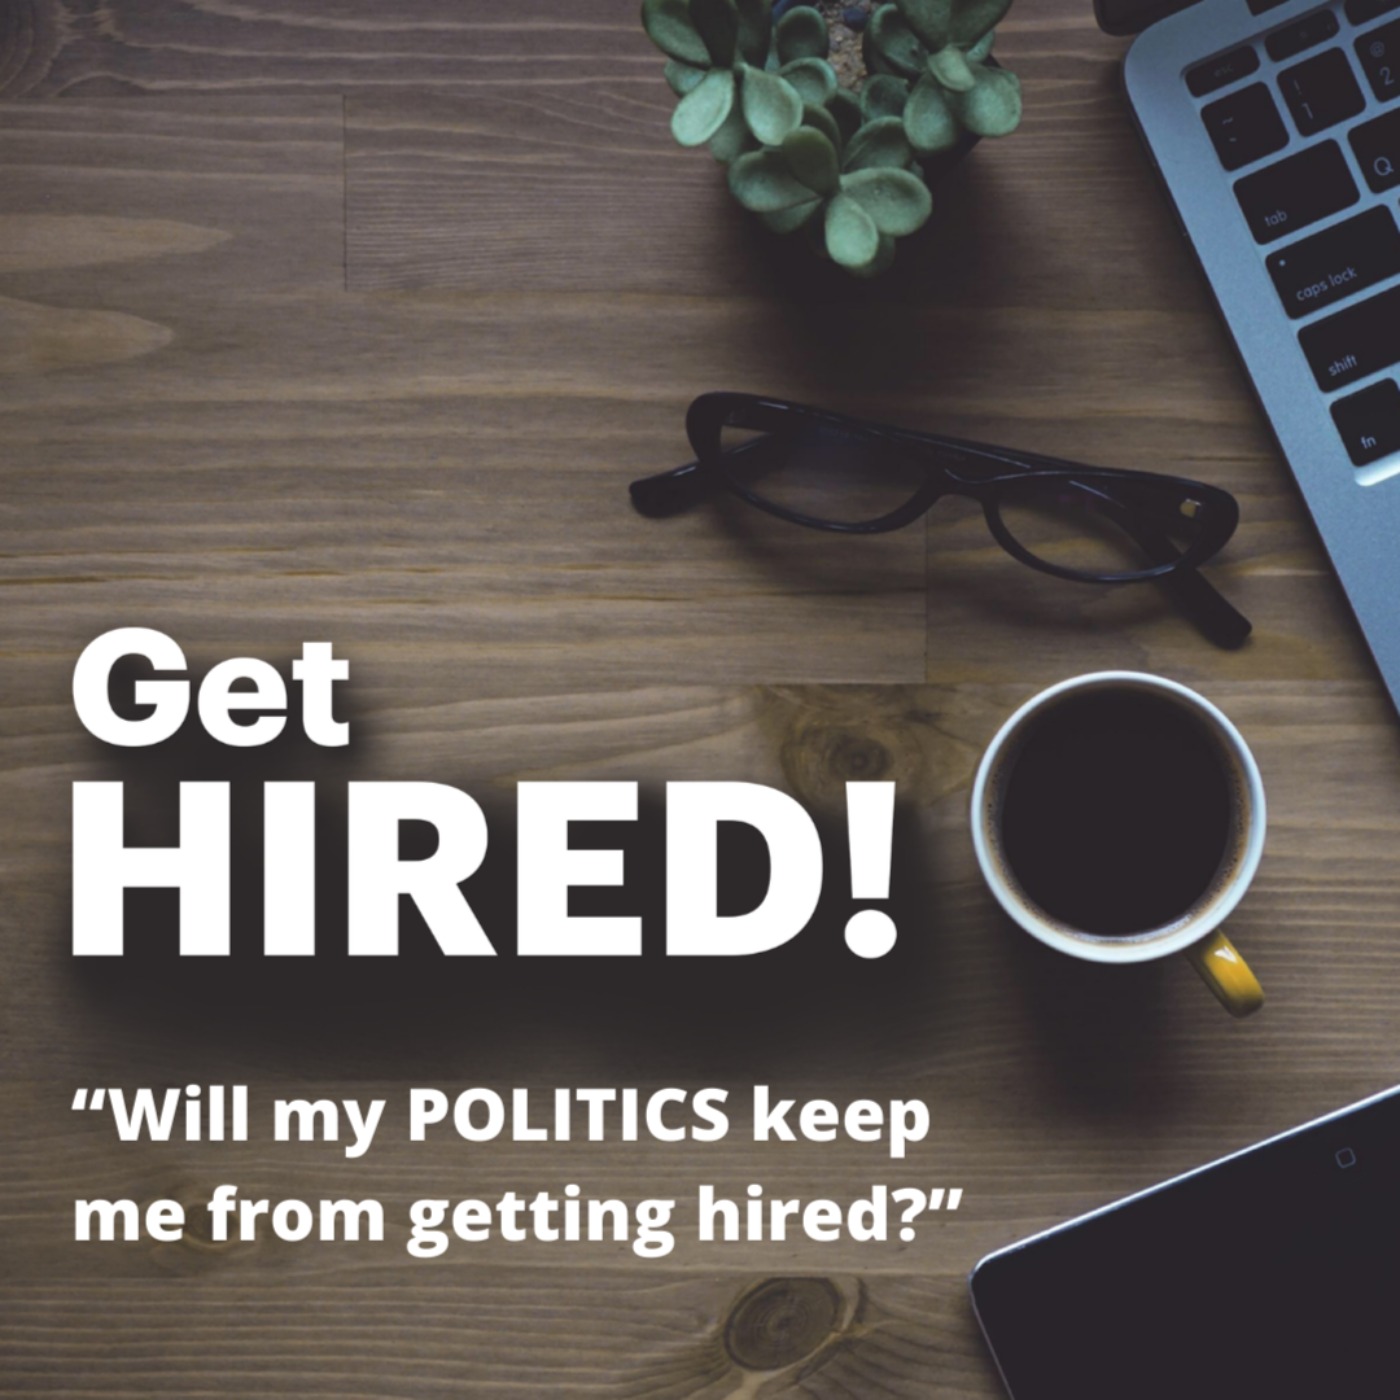 Get Hired: "Will my POLITICS keep me from getting hired?”